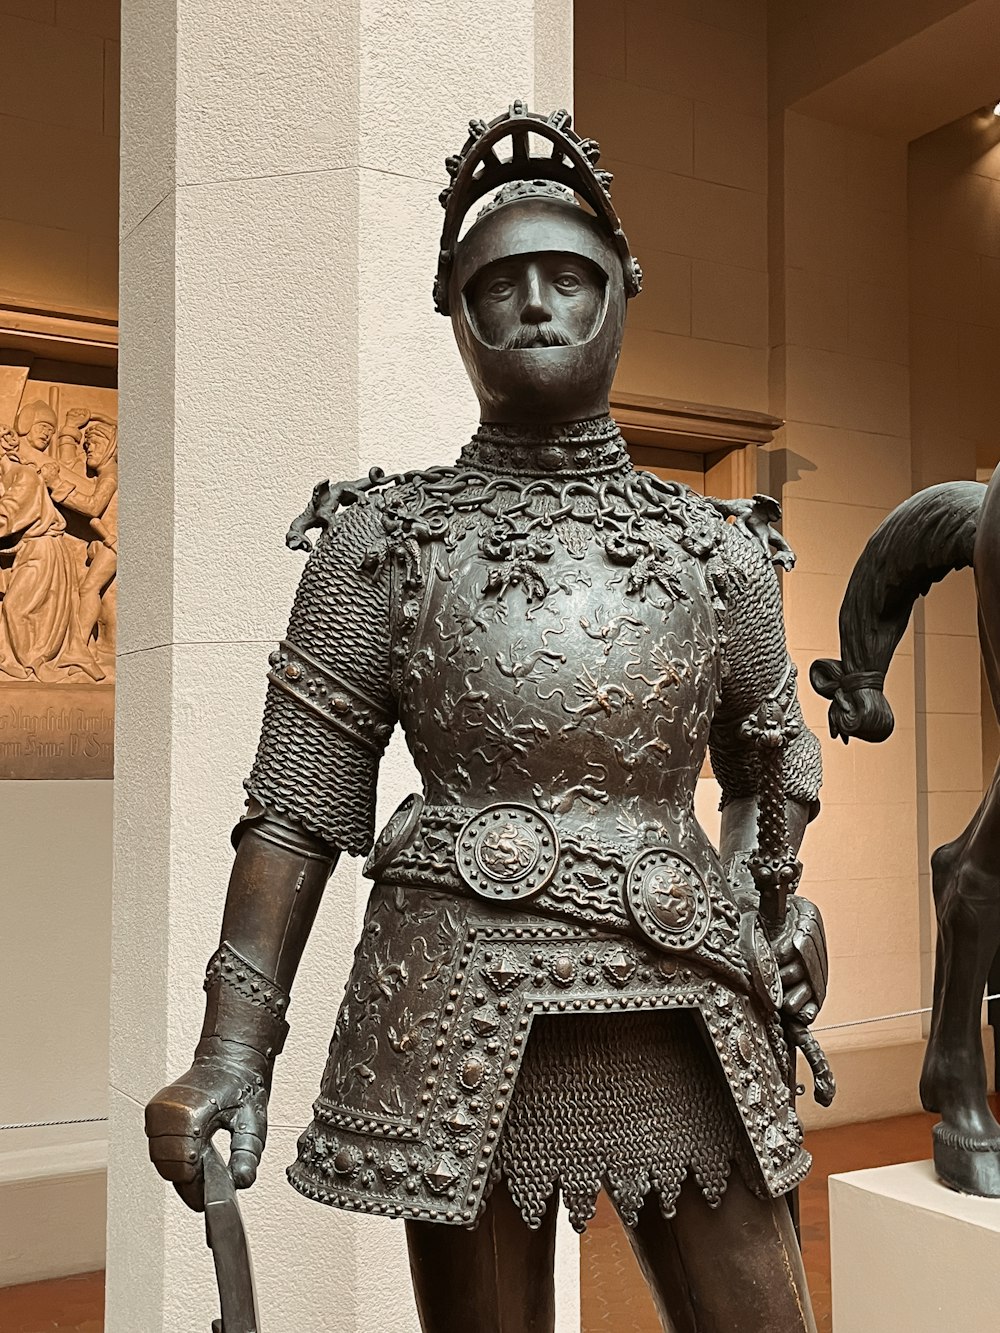 a statue of a man in armor with a horse